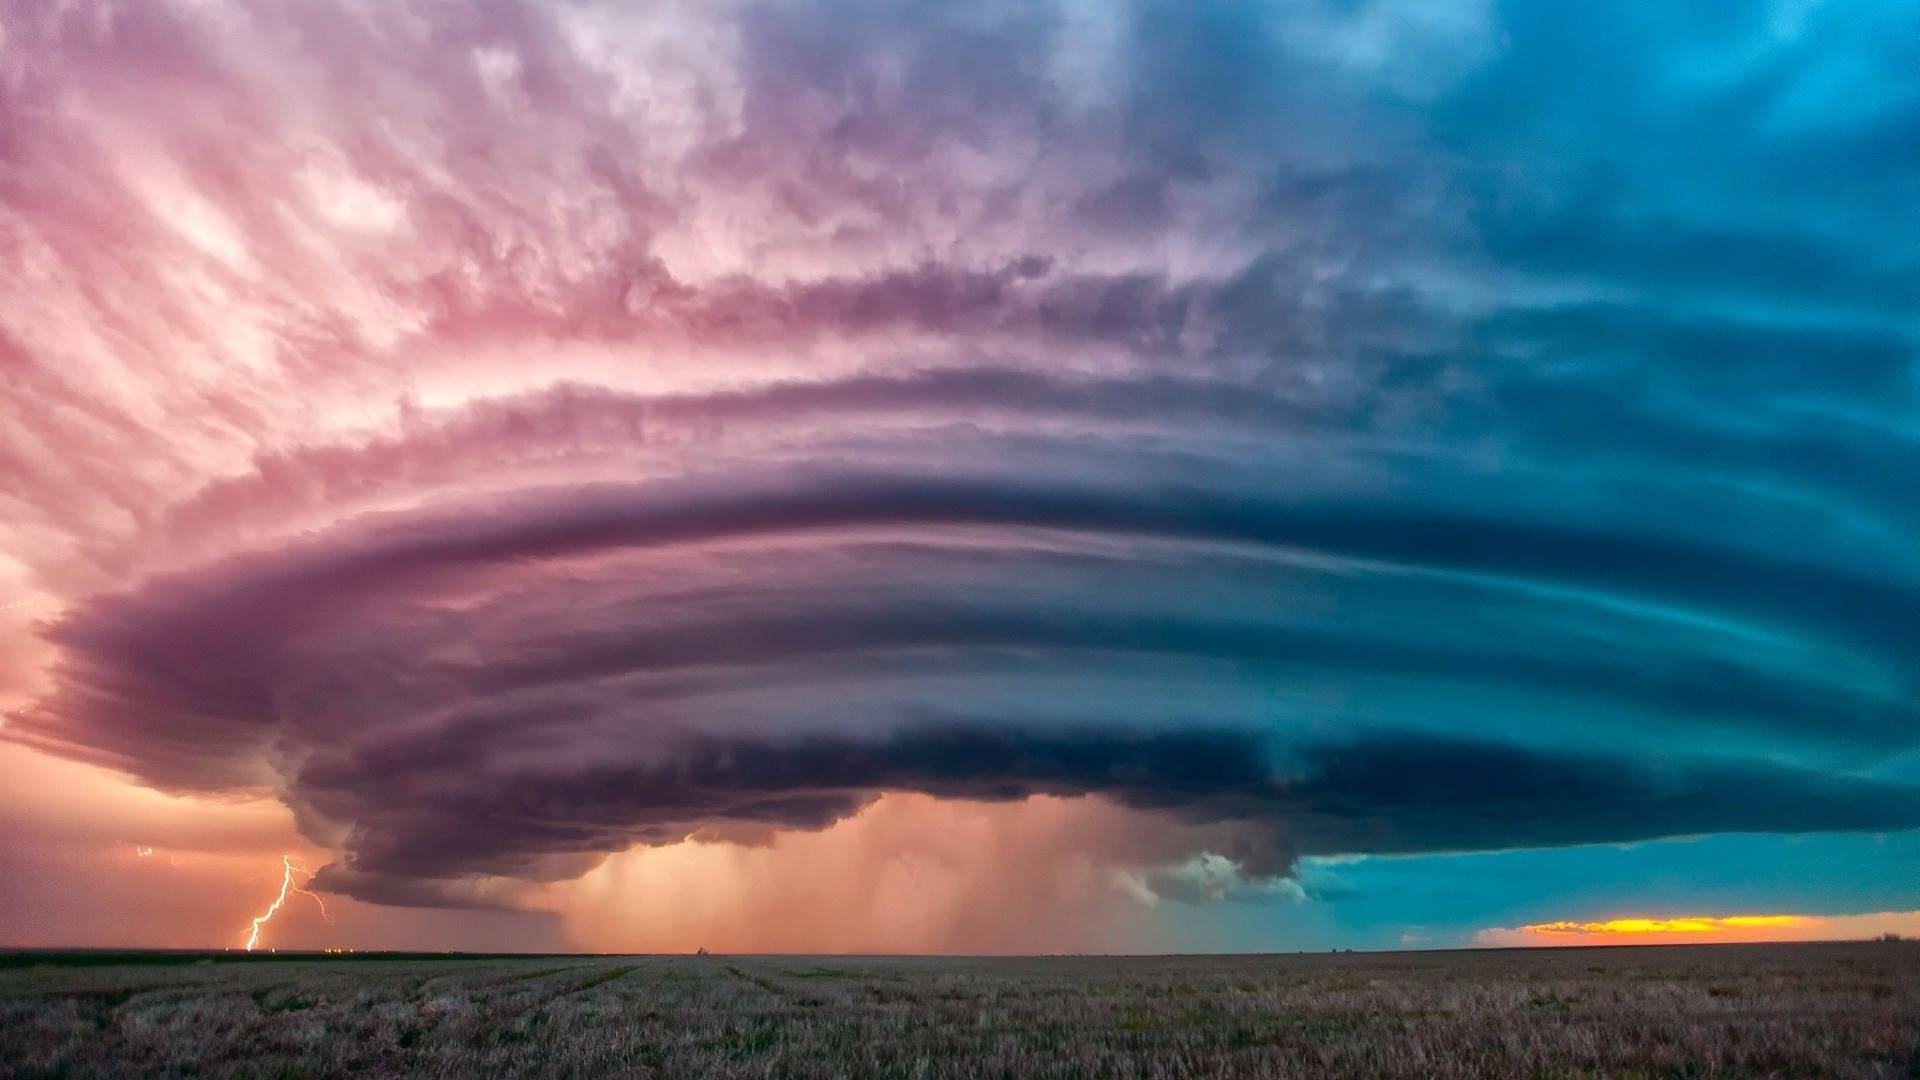 Witness The Spectacular Whirlwind of Kansas Wallpaper